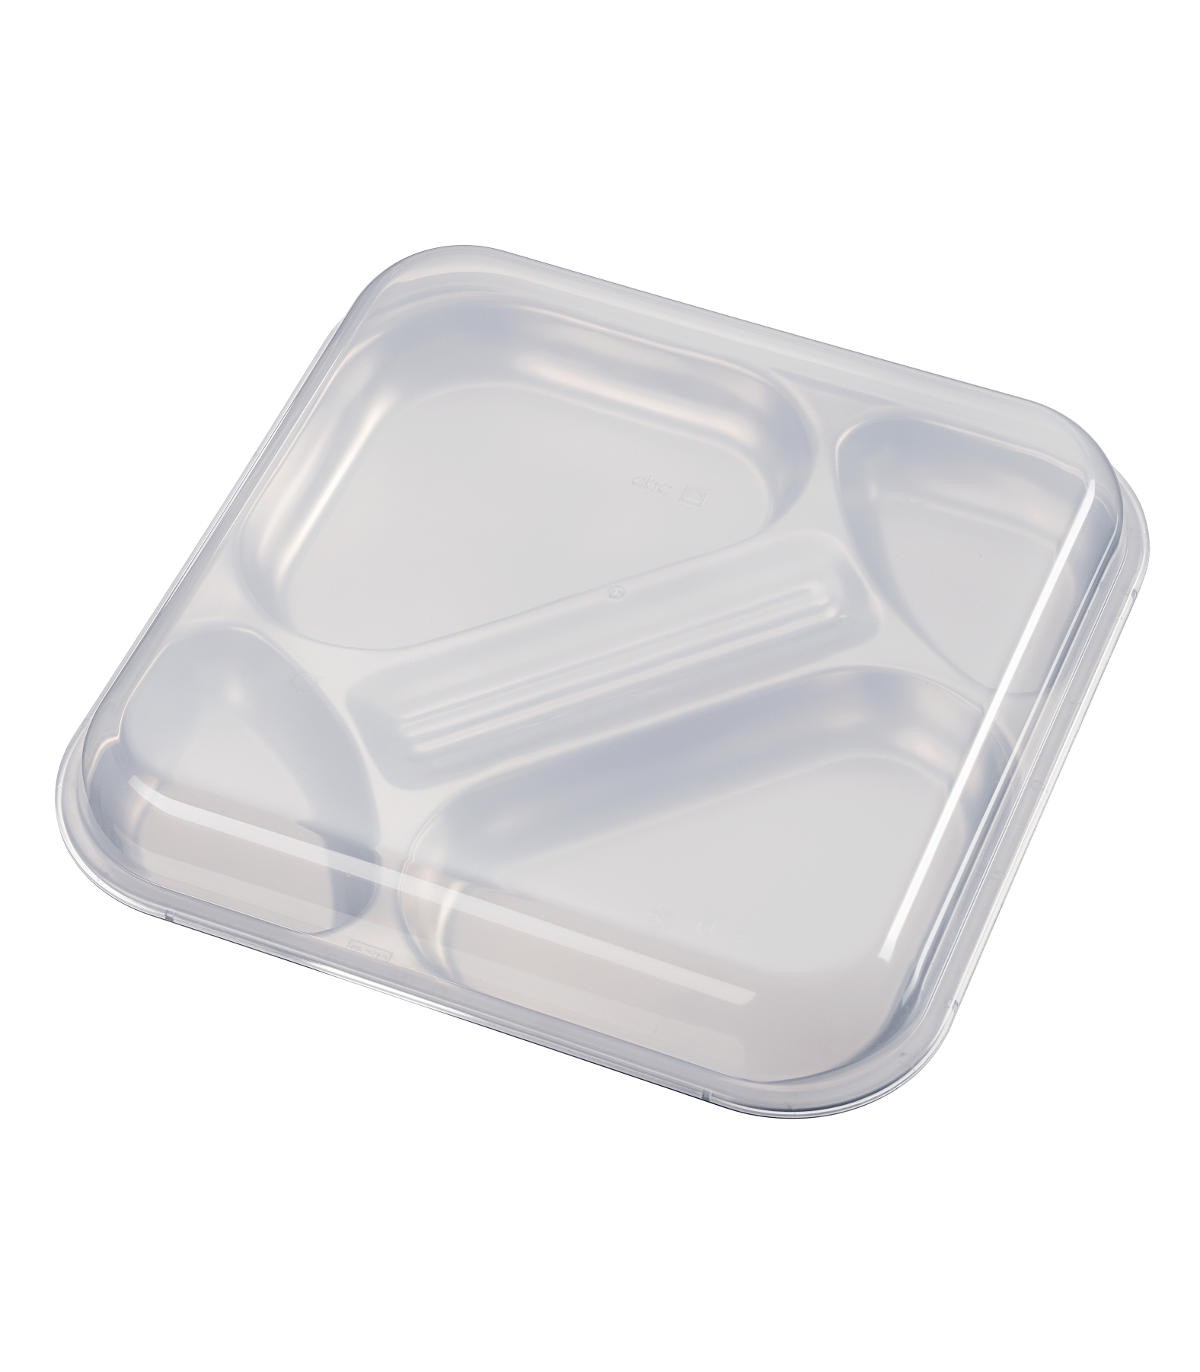 https://www.stellinox.com/4523-superlarge_default/10-compartment-meal-trays-with-10-covers.jpg